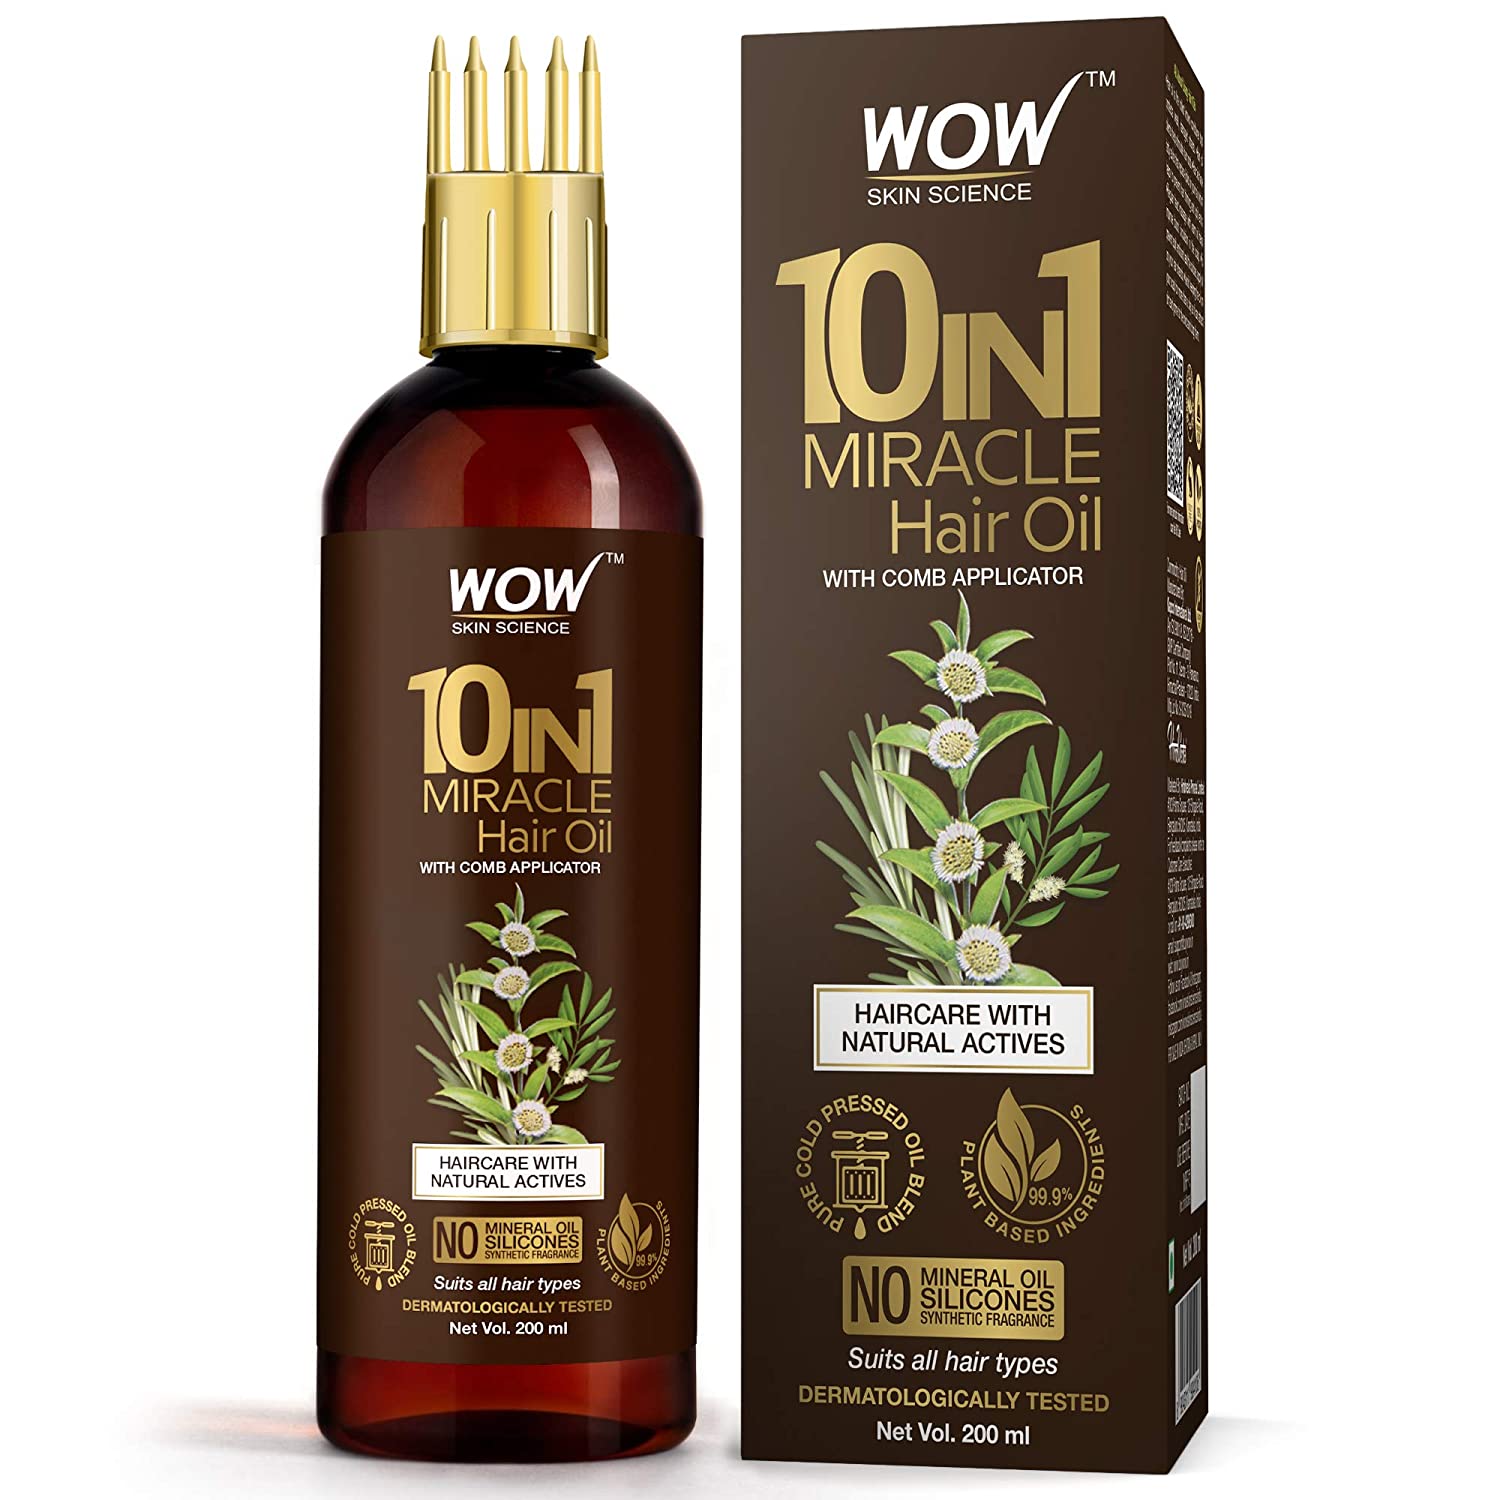 Wow 10 in 1 Miracle Hair Oil - Dermatocare